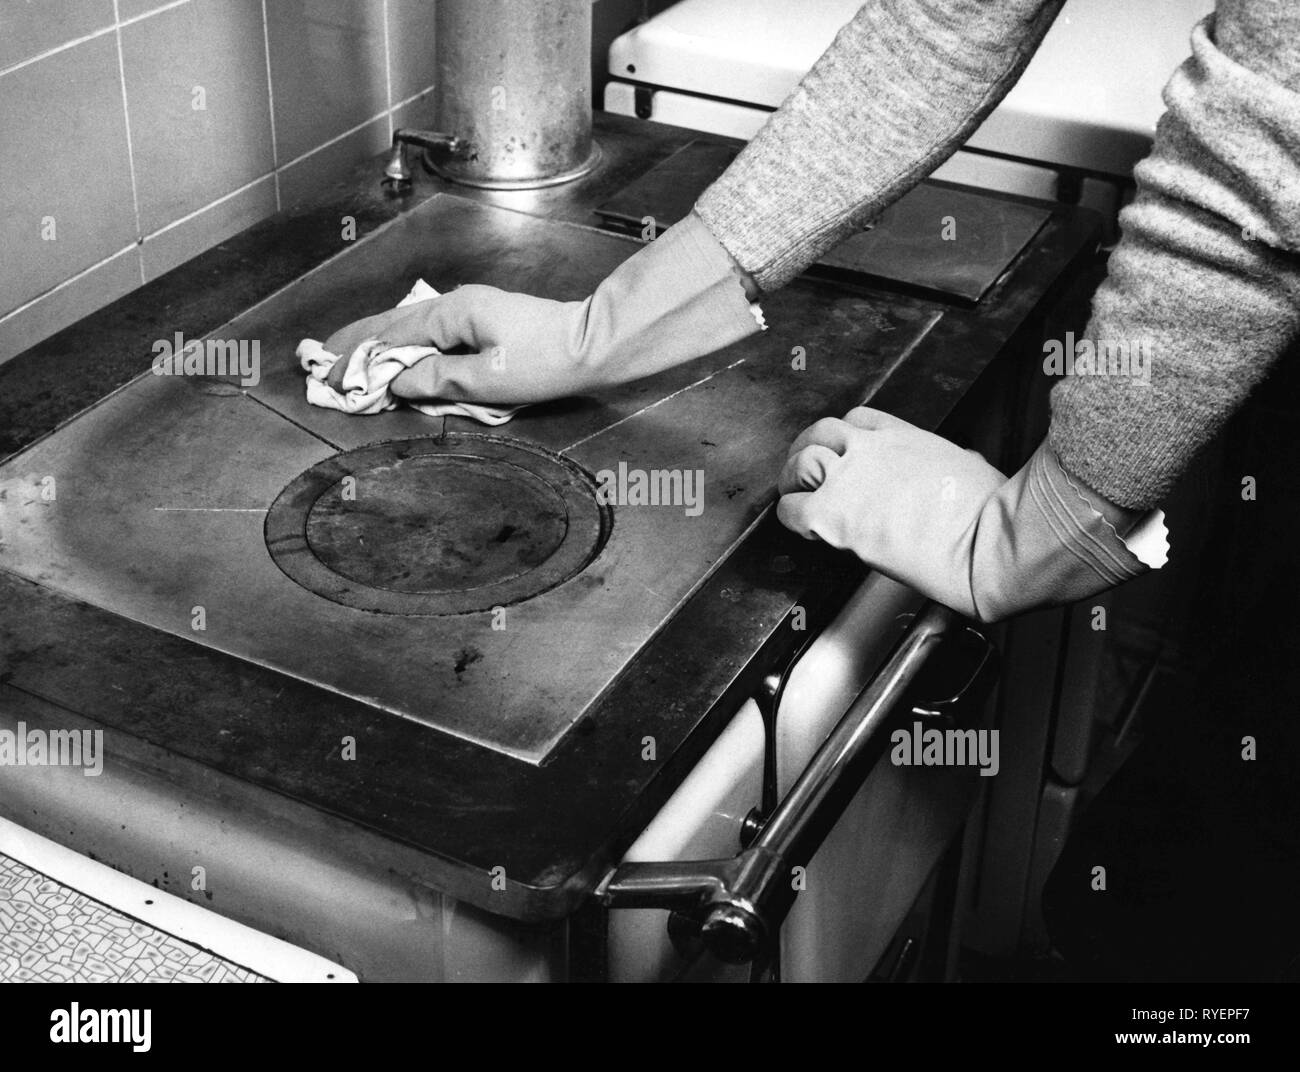 household, kitchen and kitchenware, cleaning a coal range, 1960s, range, stoves, hob, stove, stove top, stovetop, cook, cooking, cleanliness, cleanse, cleansing, cloth, cloths, rubber glove, rubber gloves, glove, gloves, household chores, do the chores, housekeep, domestic work, housework, cooker, cookers, household, households, kitchen, kitchens, cleaning, clean, historic, historical, people, 20th century, Additional-Rights-Clearance-Info-Not-Available Stock Photo